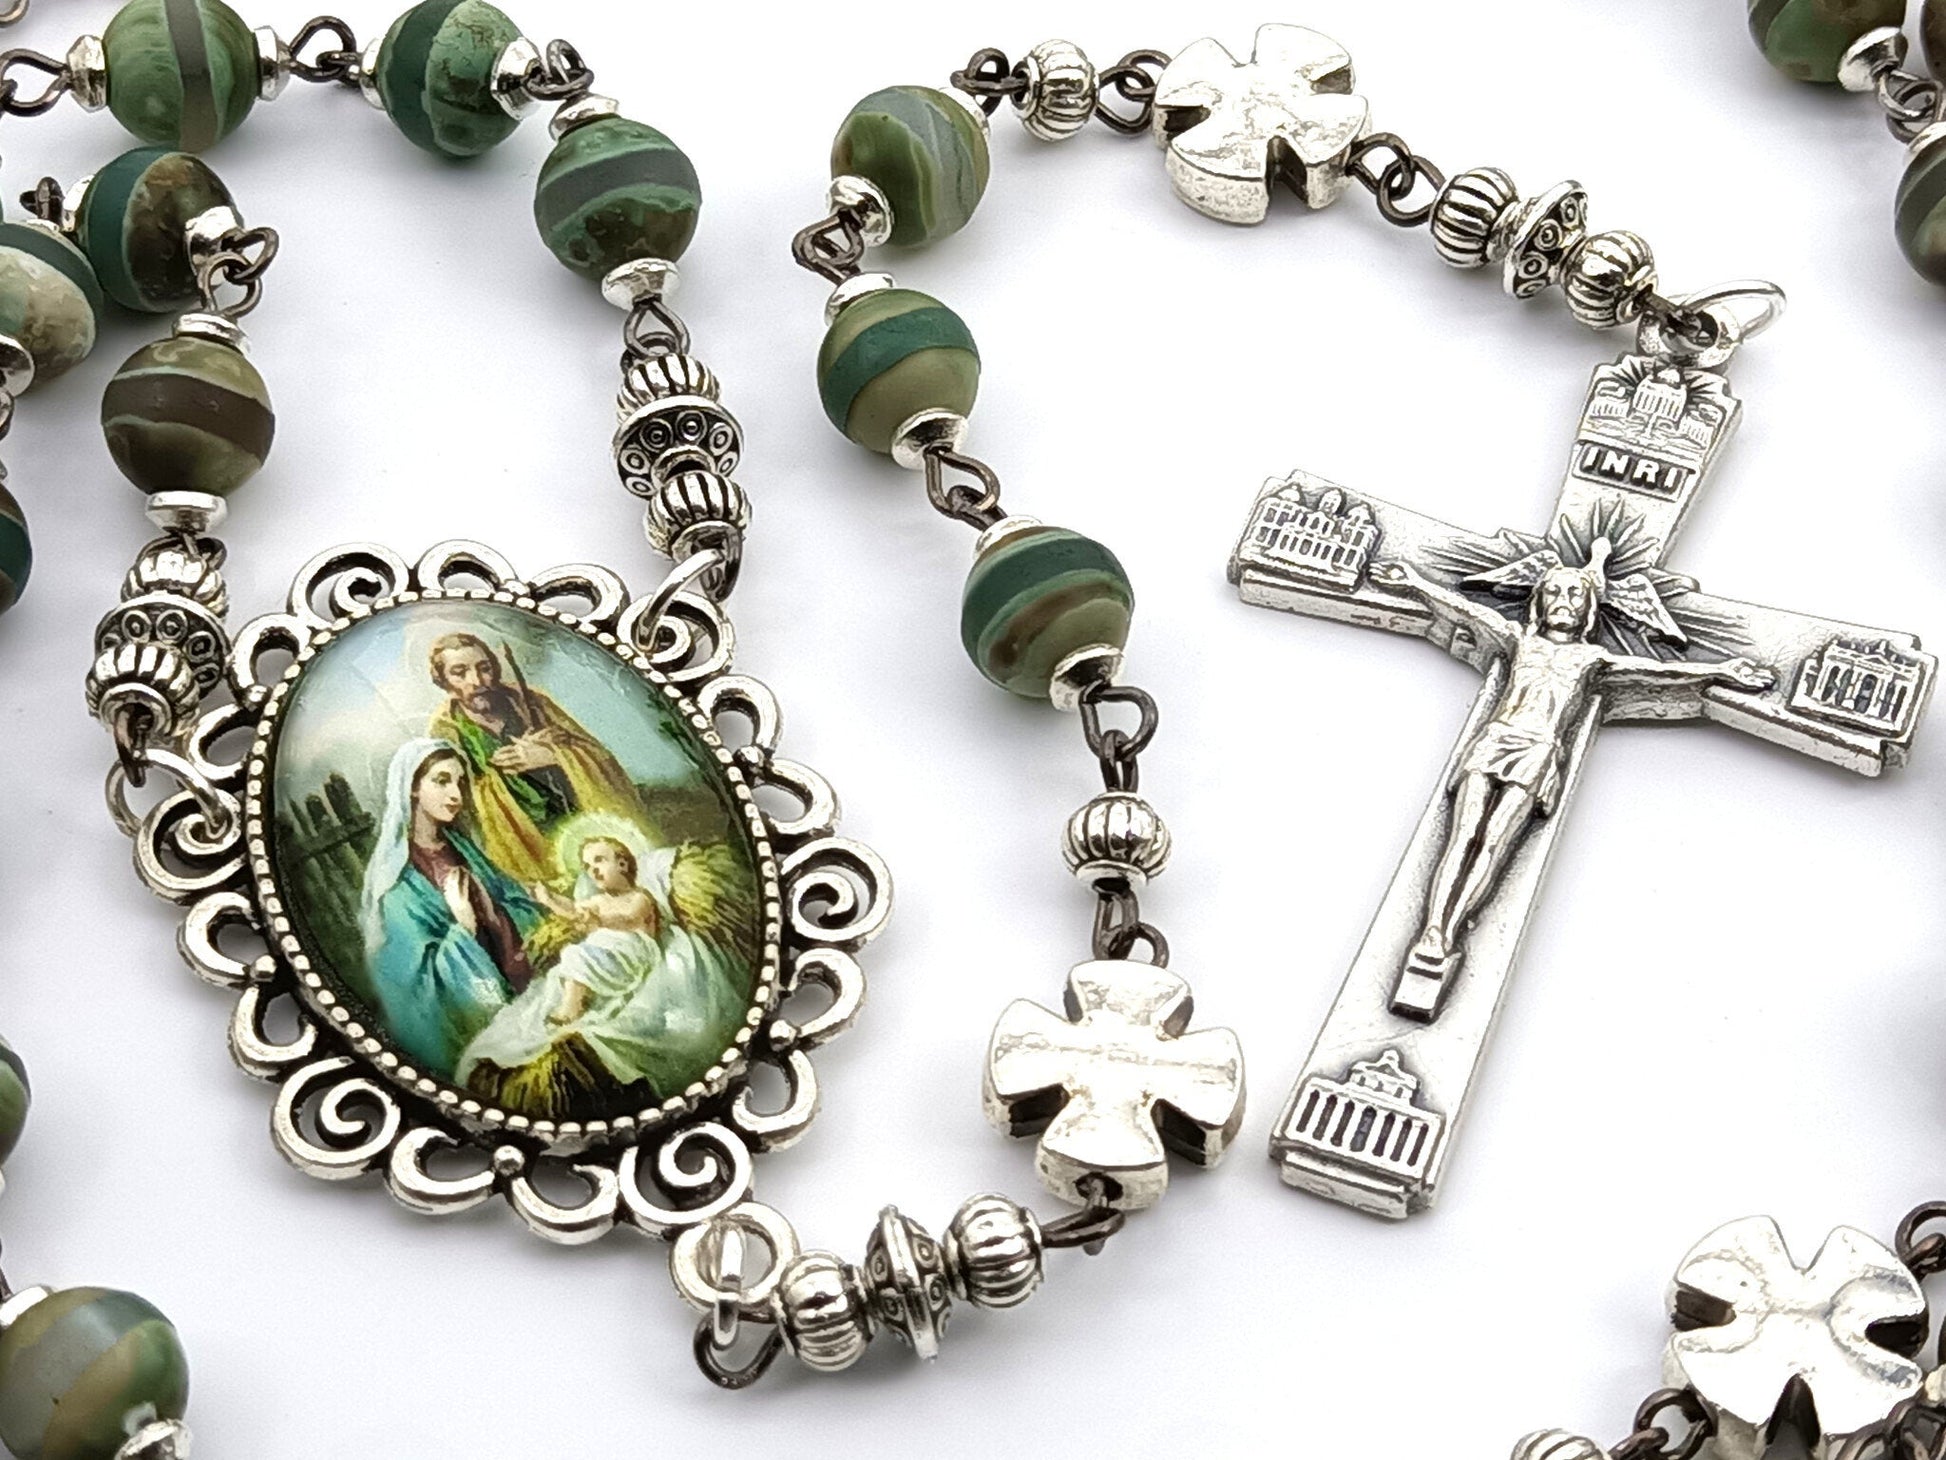 Holy Family unique rosary beads with green gemstone beads, silver cross pater beads, silver crucifix and picture centre medal. 